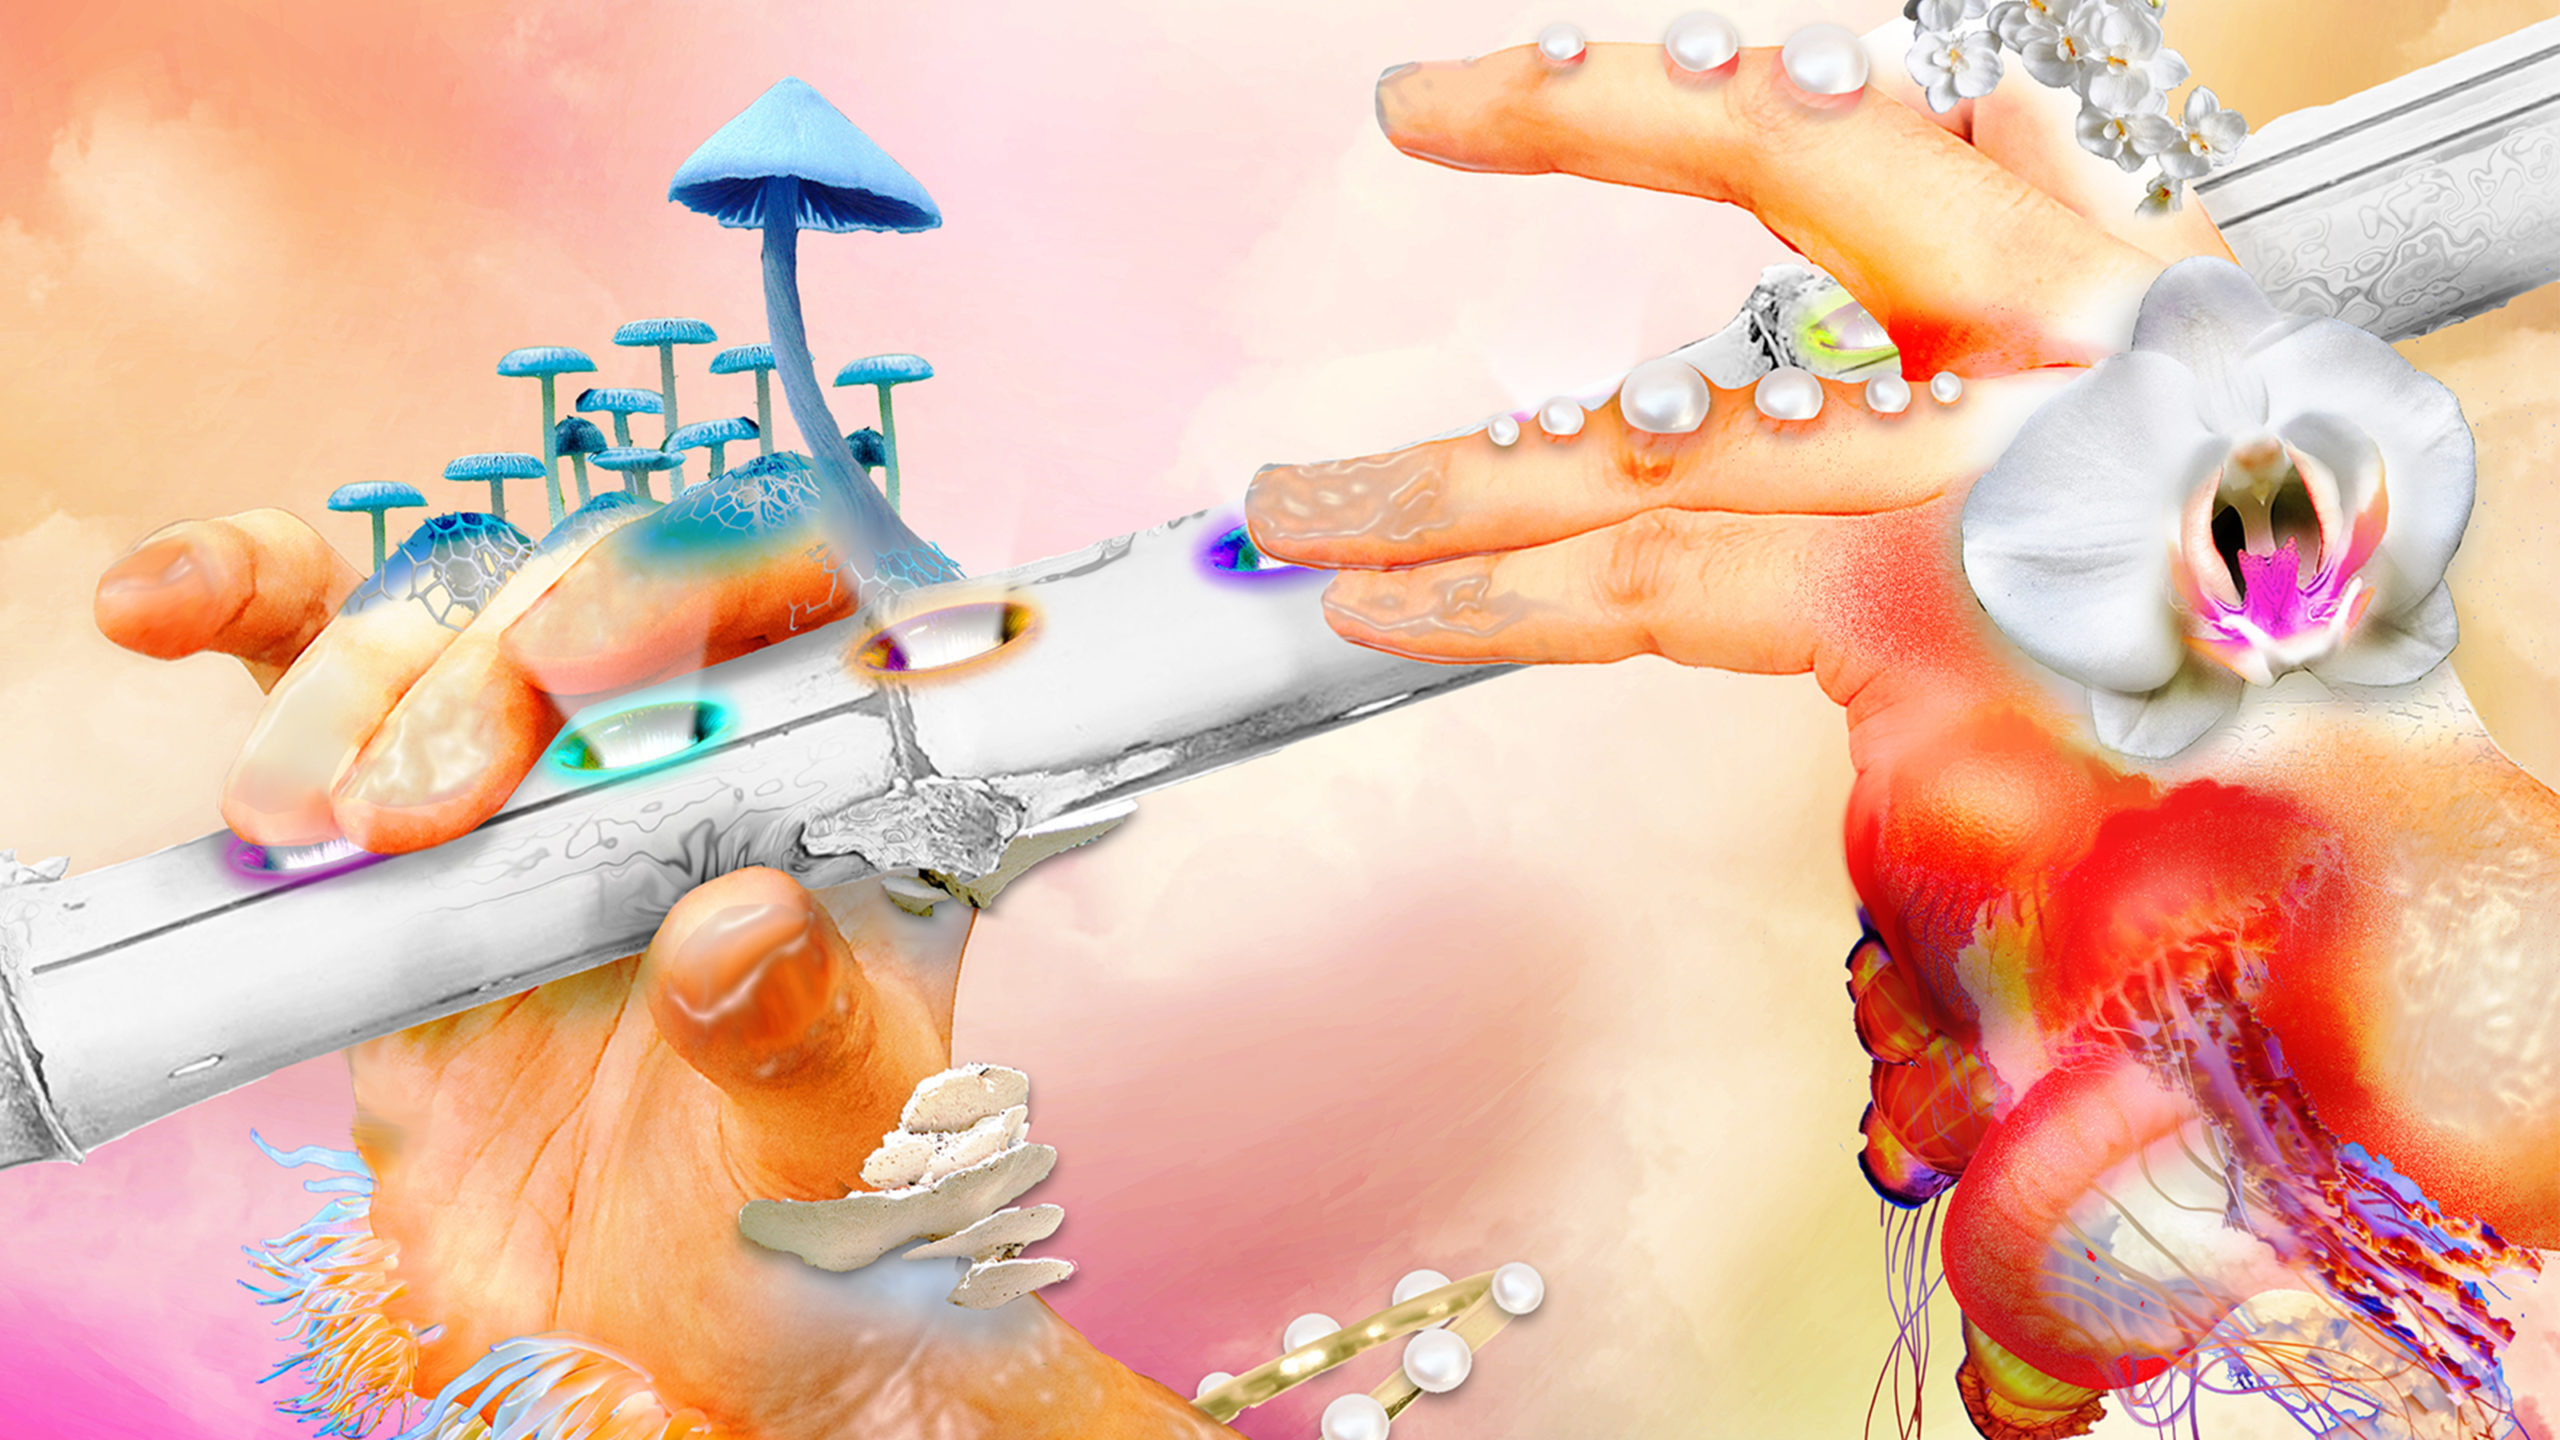 psychedelic hands playing flute